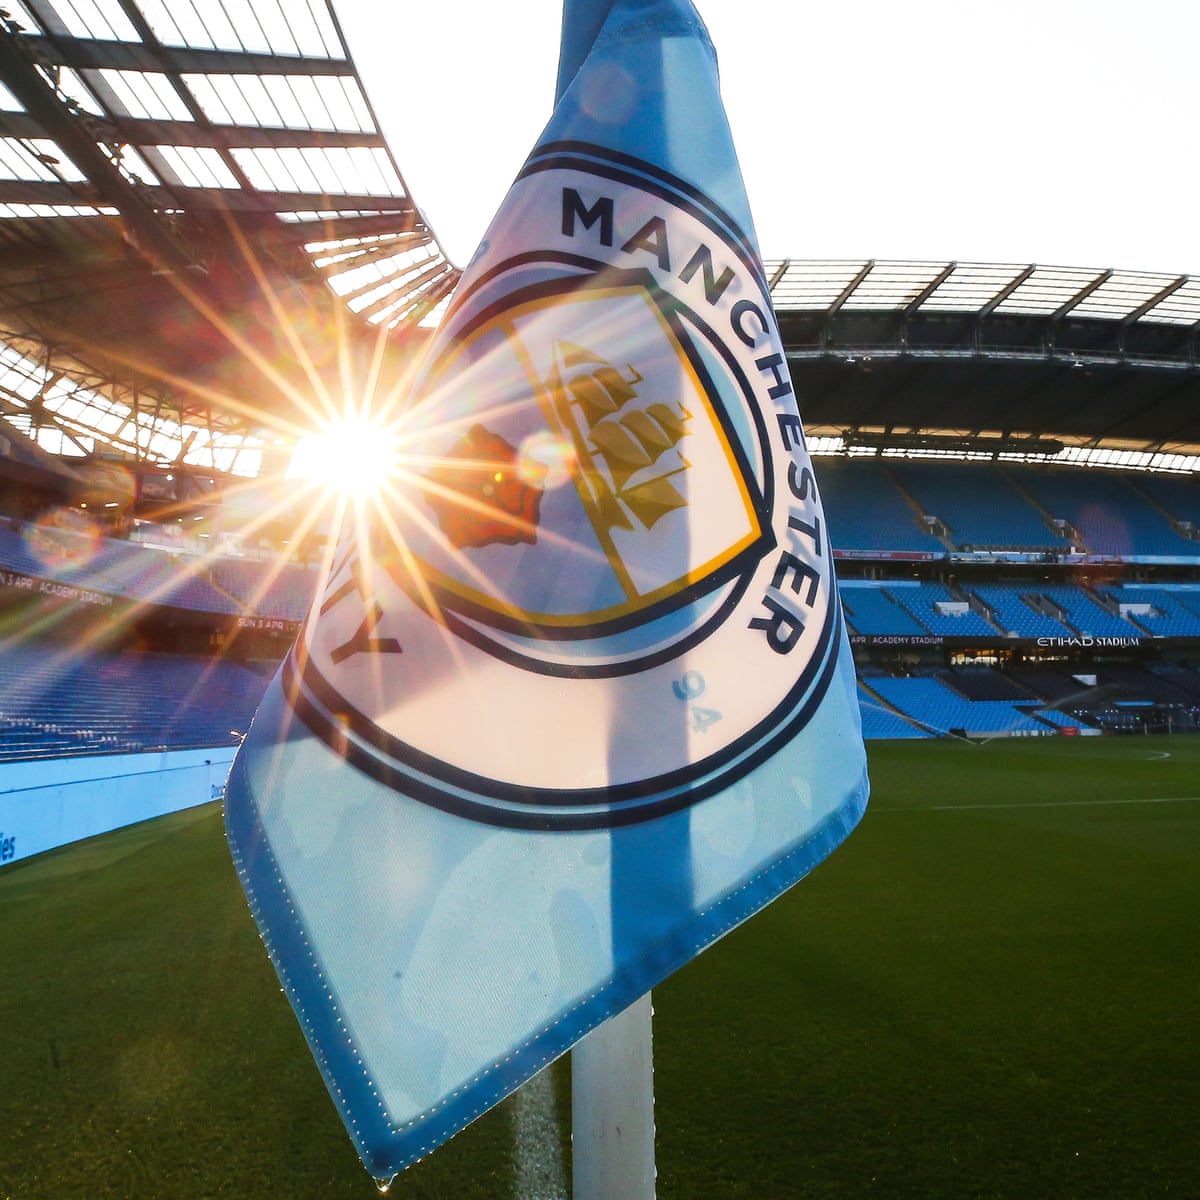 If Manchester City are guilty they have betrayed football as a spectacle